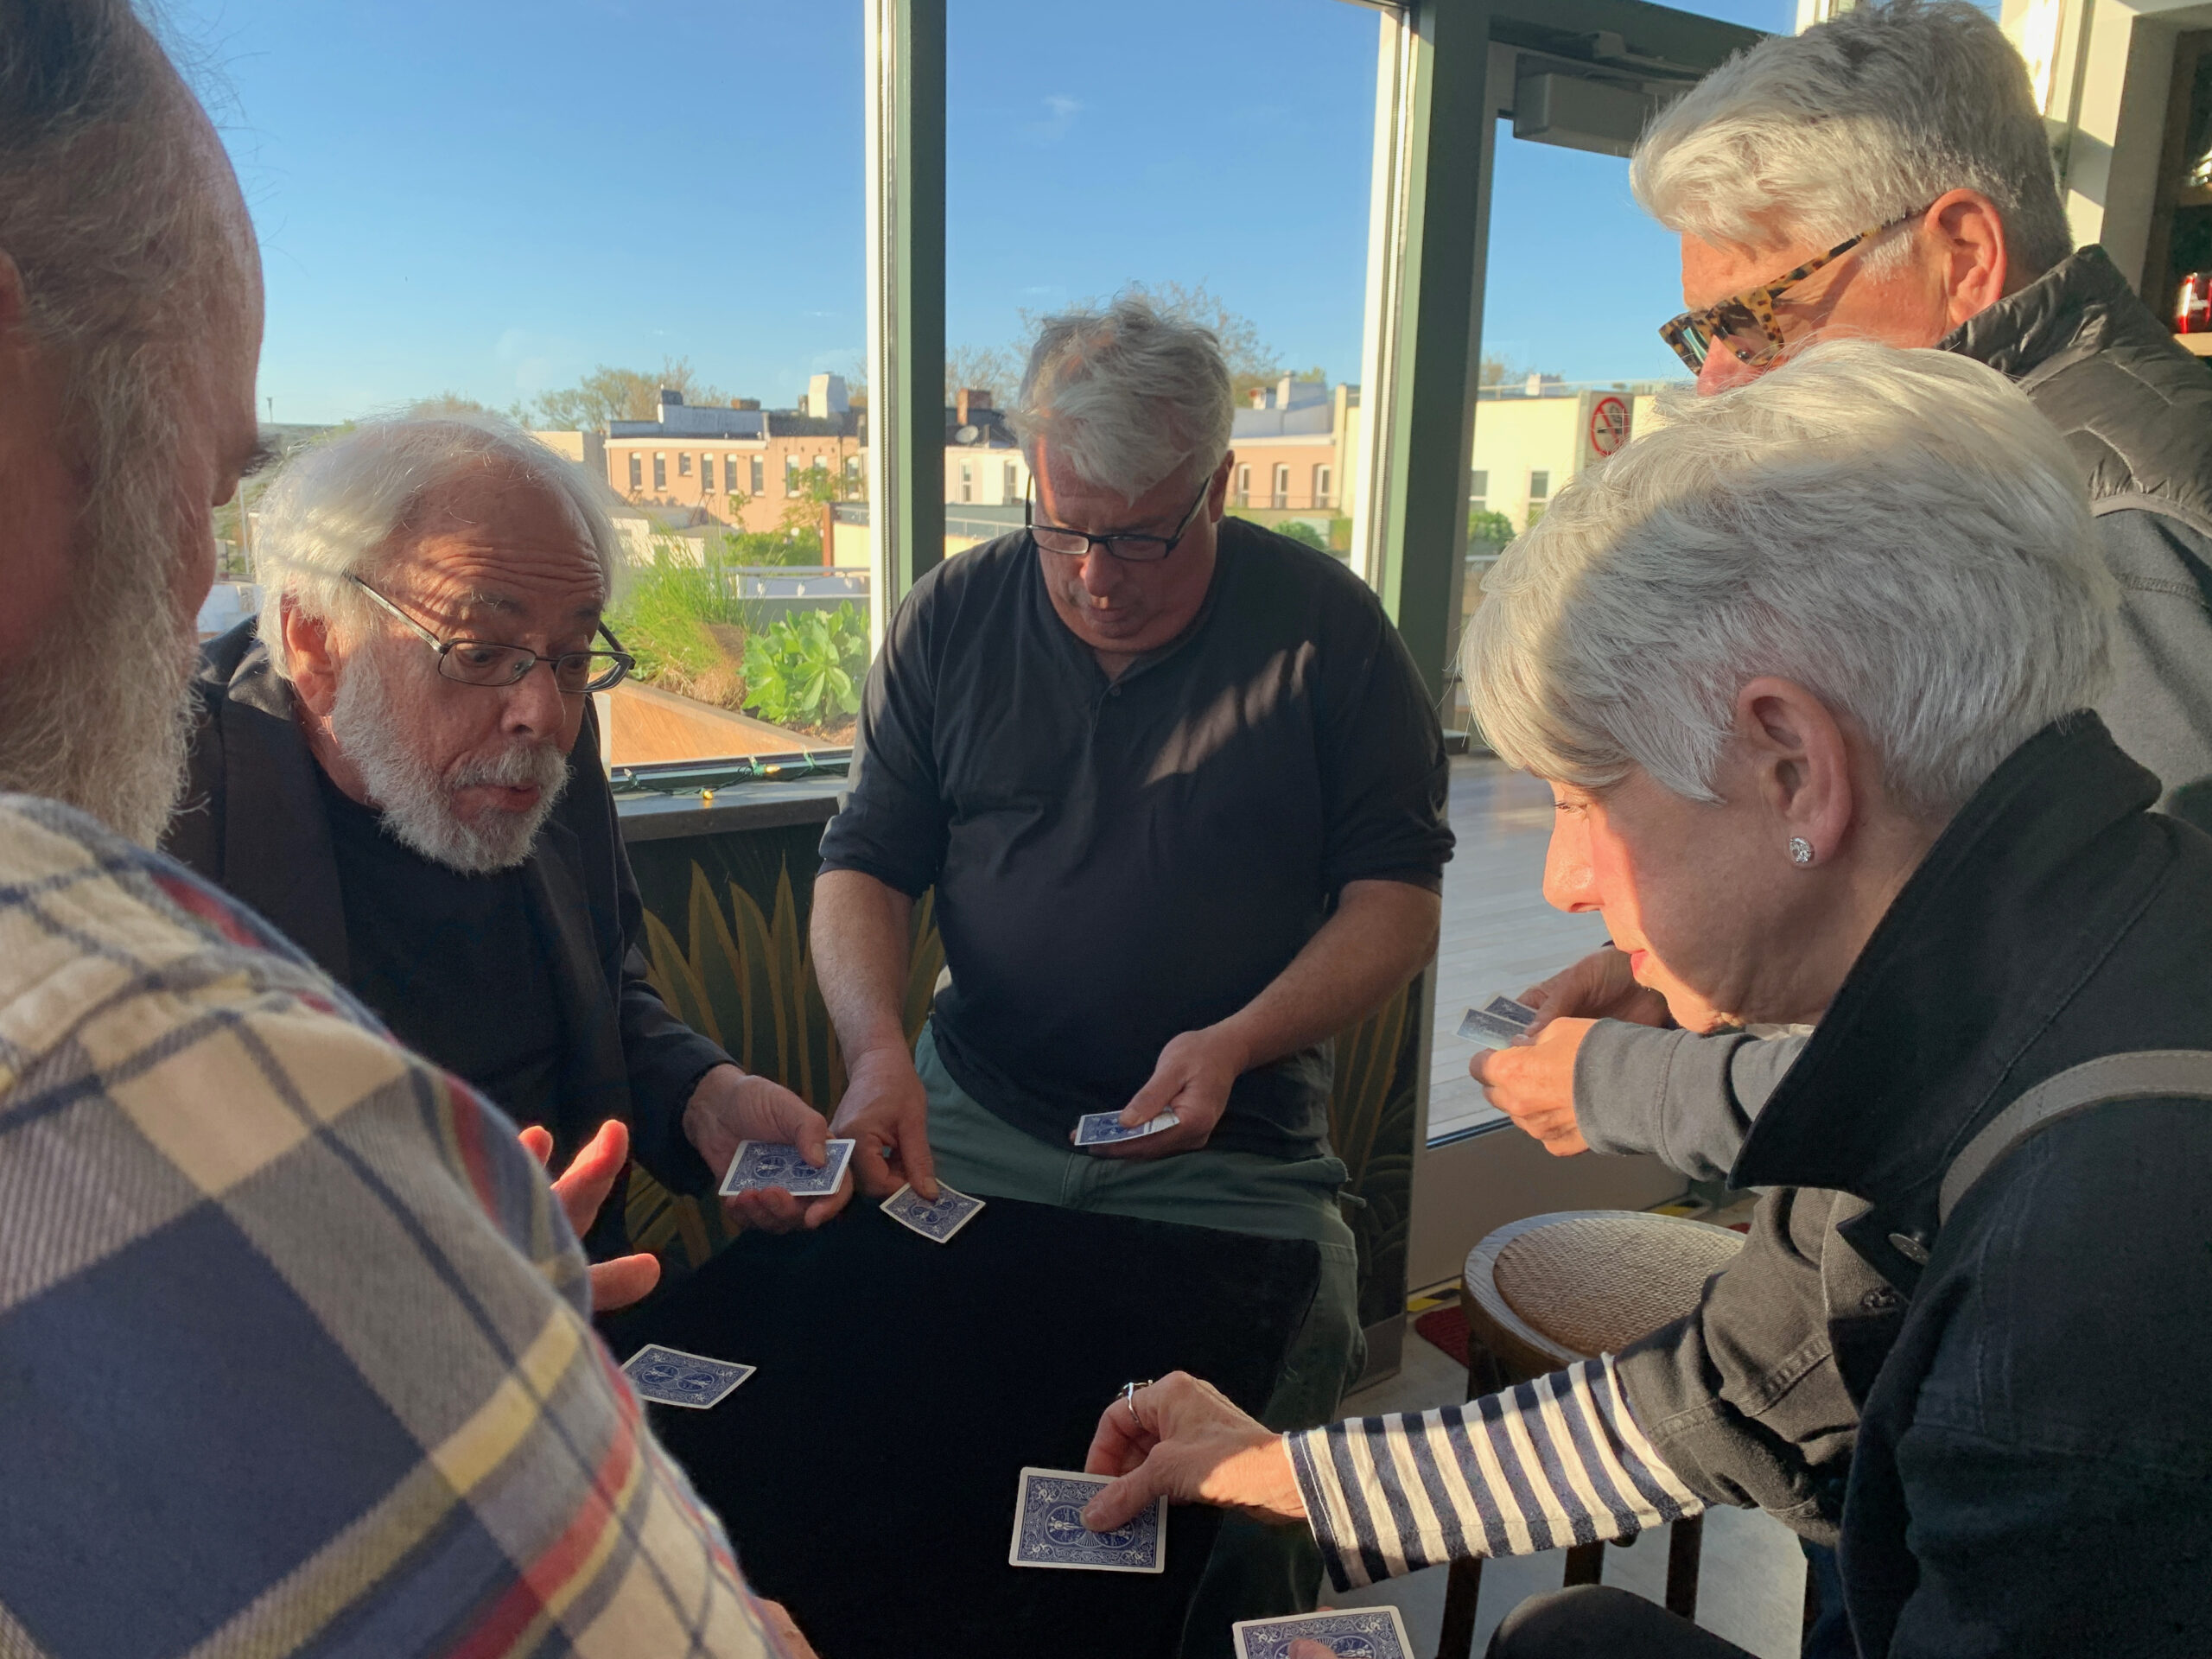 Magician Allan Kronzek stumps the crowd with his card tricks on a recent Tuesday at The Green Room bar of the Sag Harbor Cinema. ANNETTE HINKLE